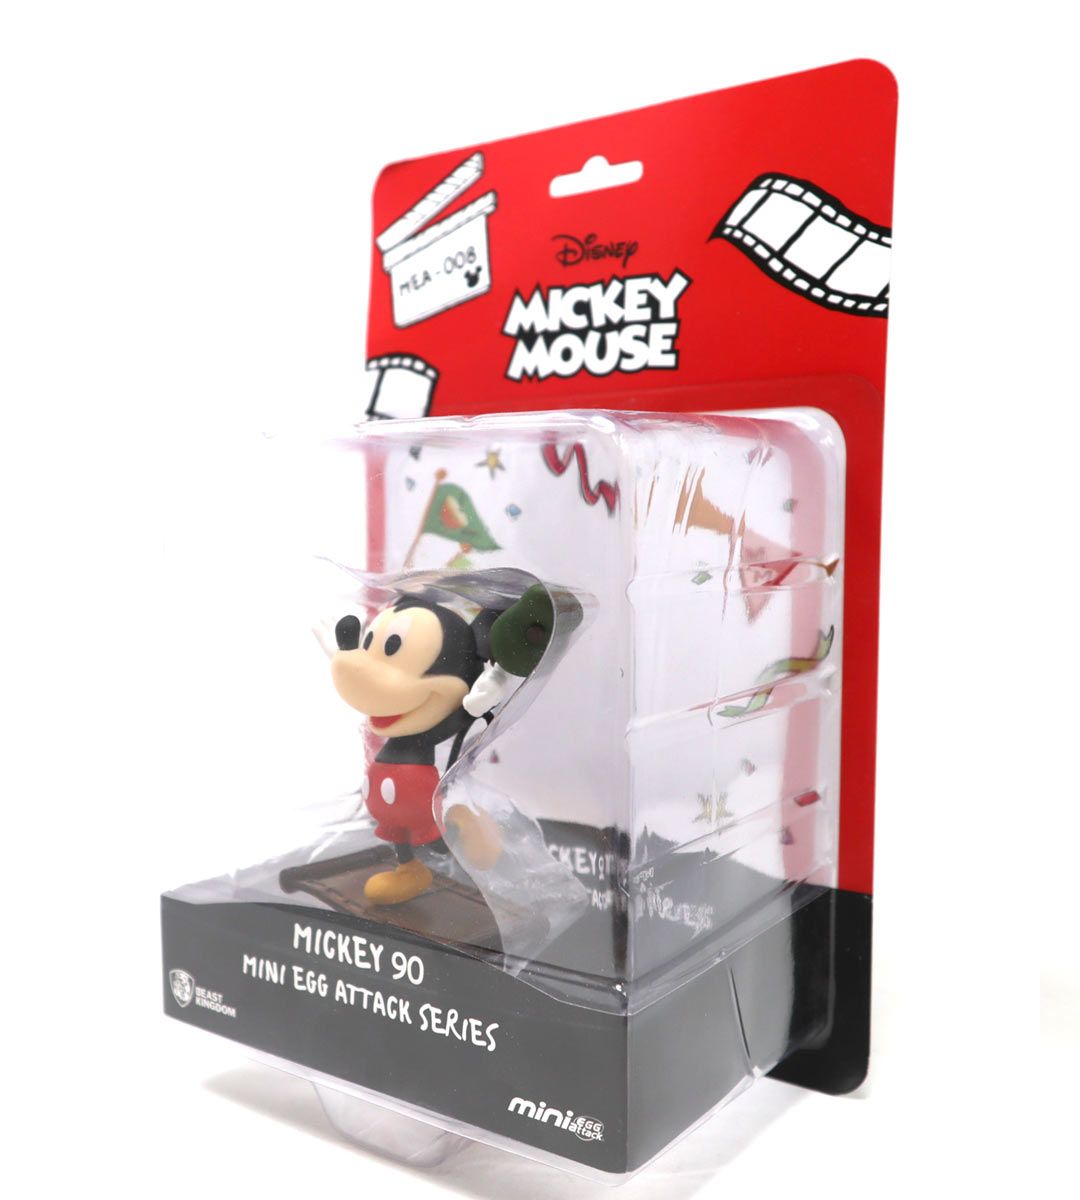 Mini Egg Attack Series - Modern Mickey 90 (Mickey Mouse)